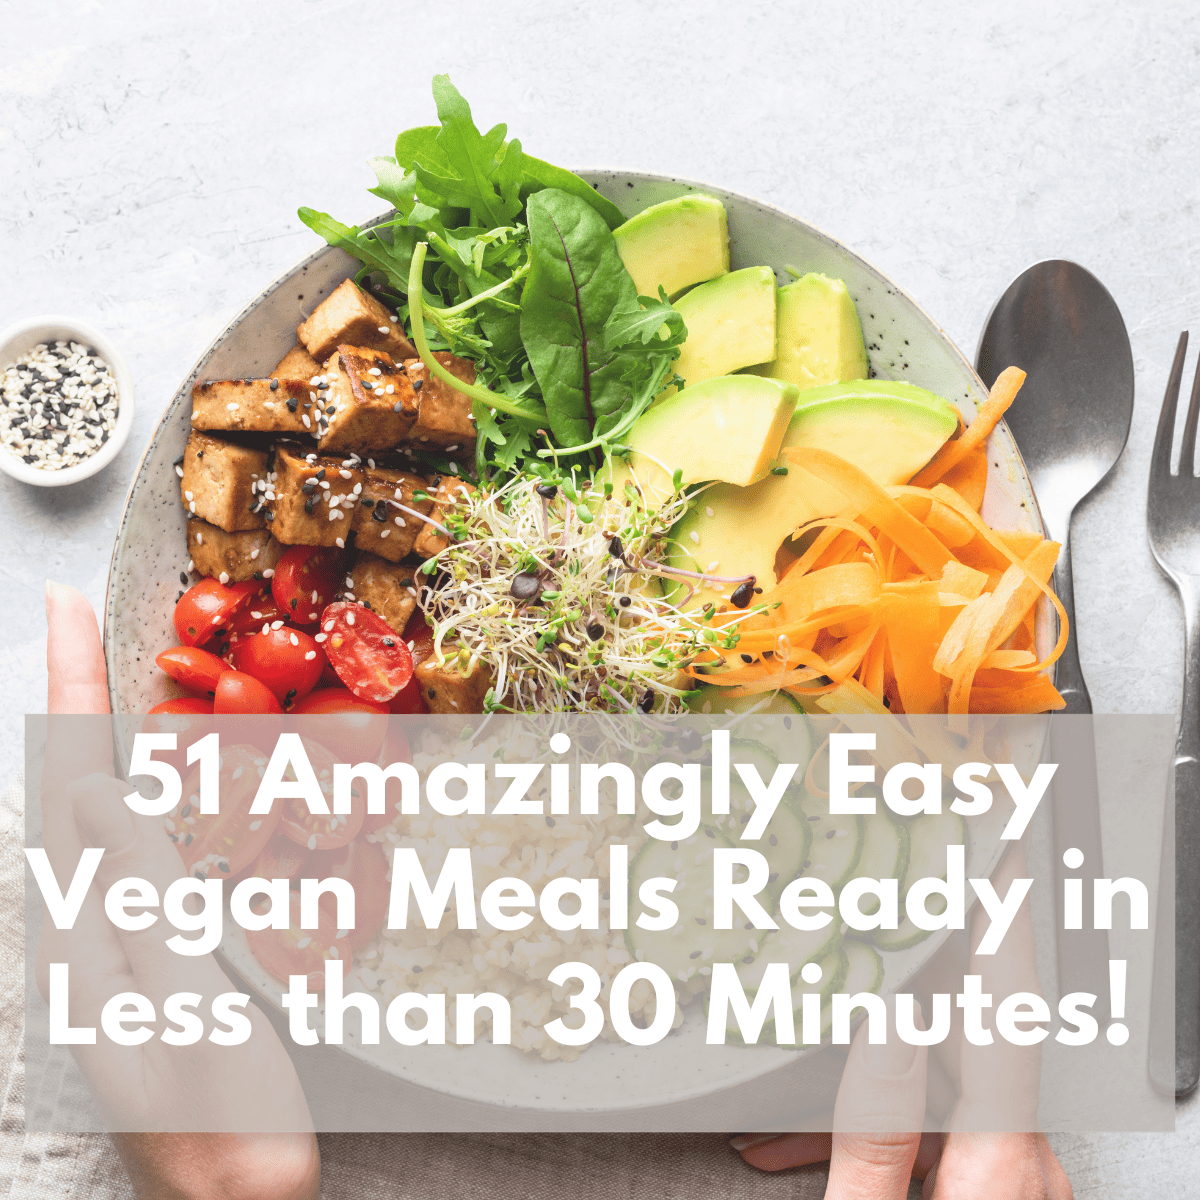 51 Easy Vegan Meals Ready in Less than 30 Minutes!